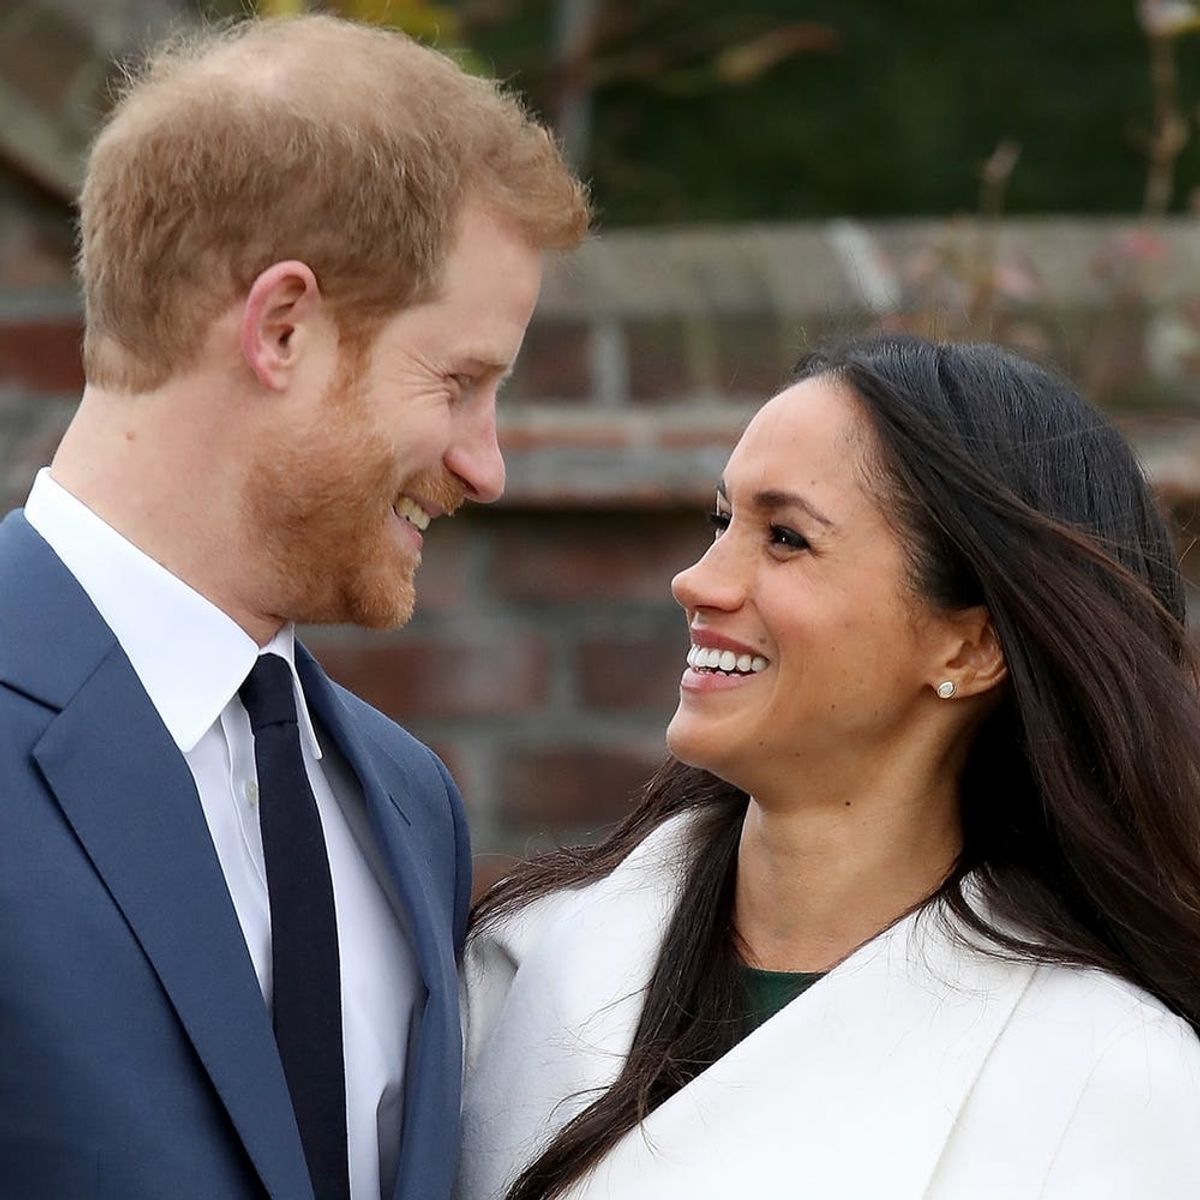 Prince Harry and Meghan Markle’s Wedding Flower Plans Say So Much About Them